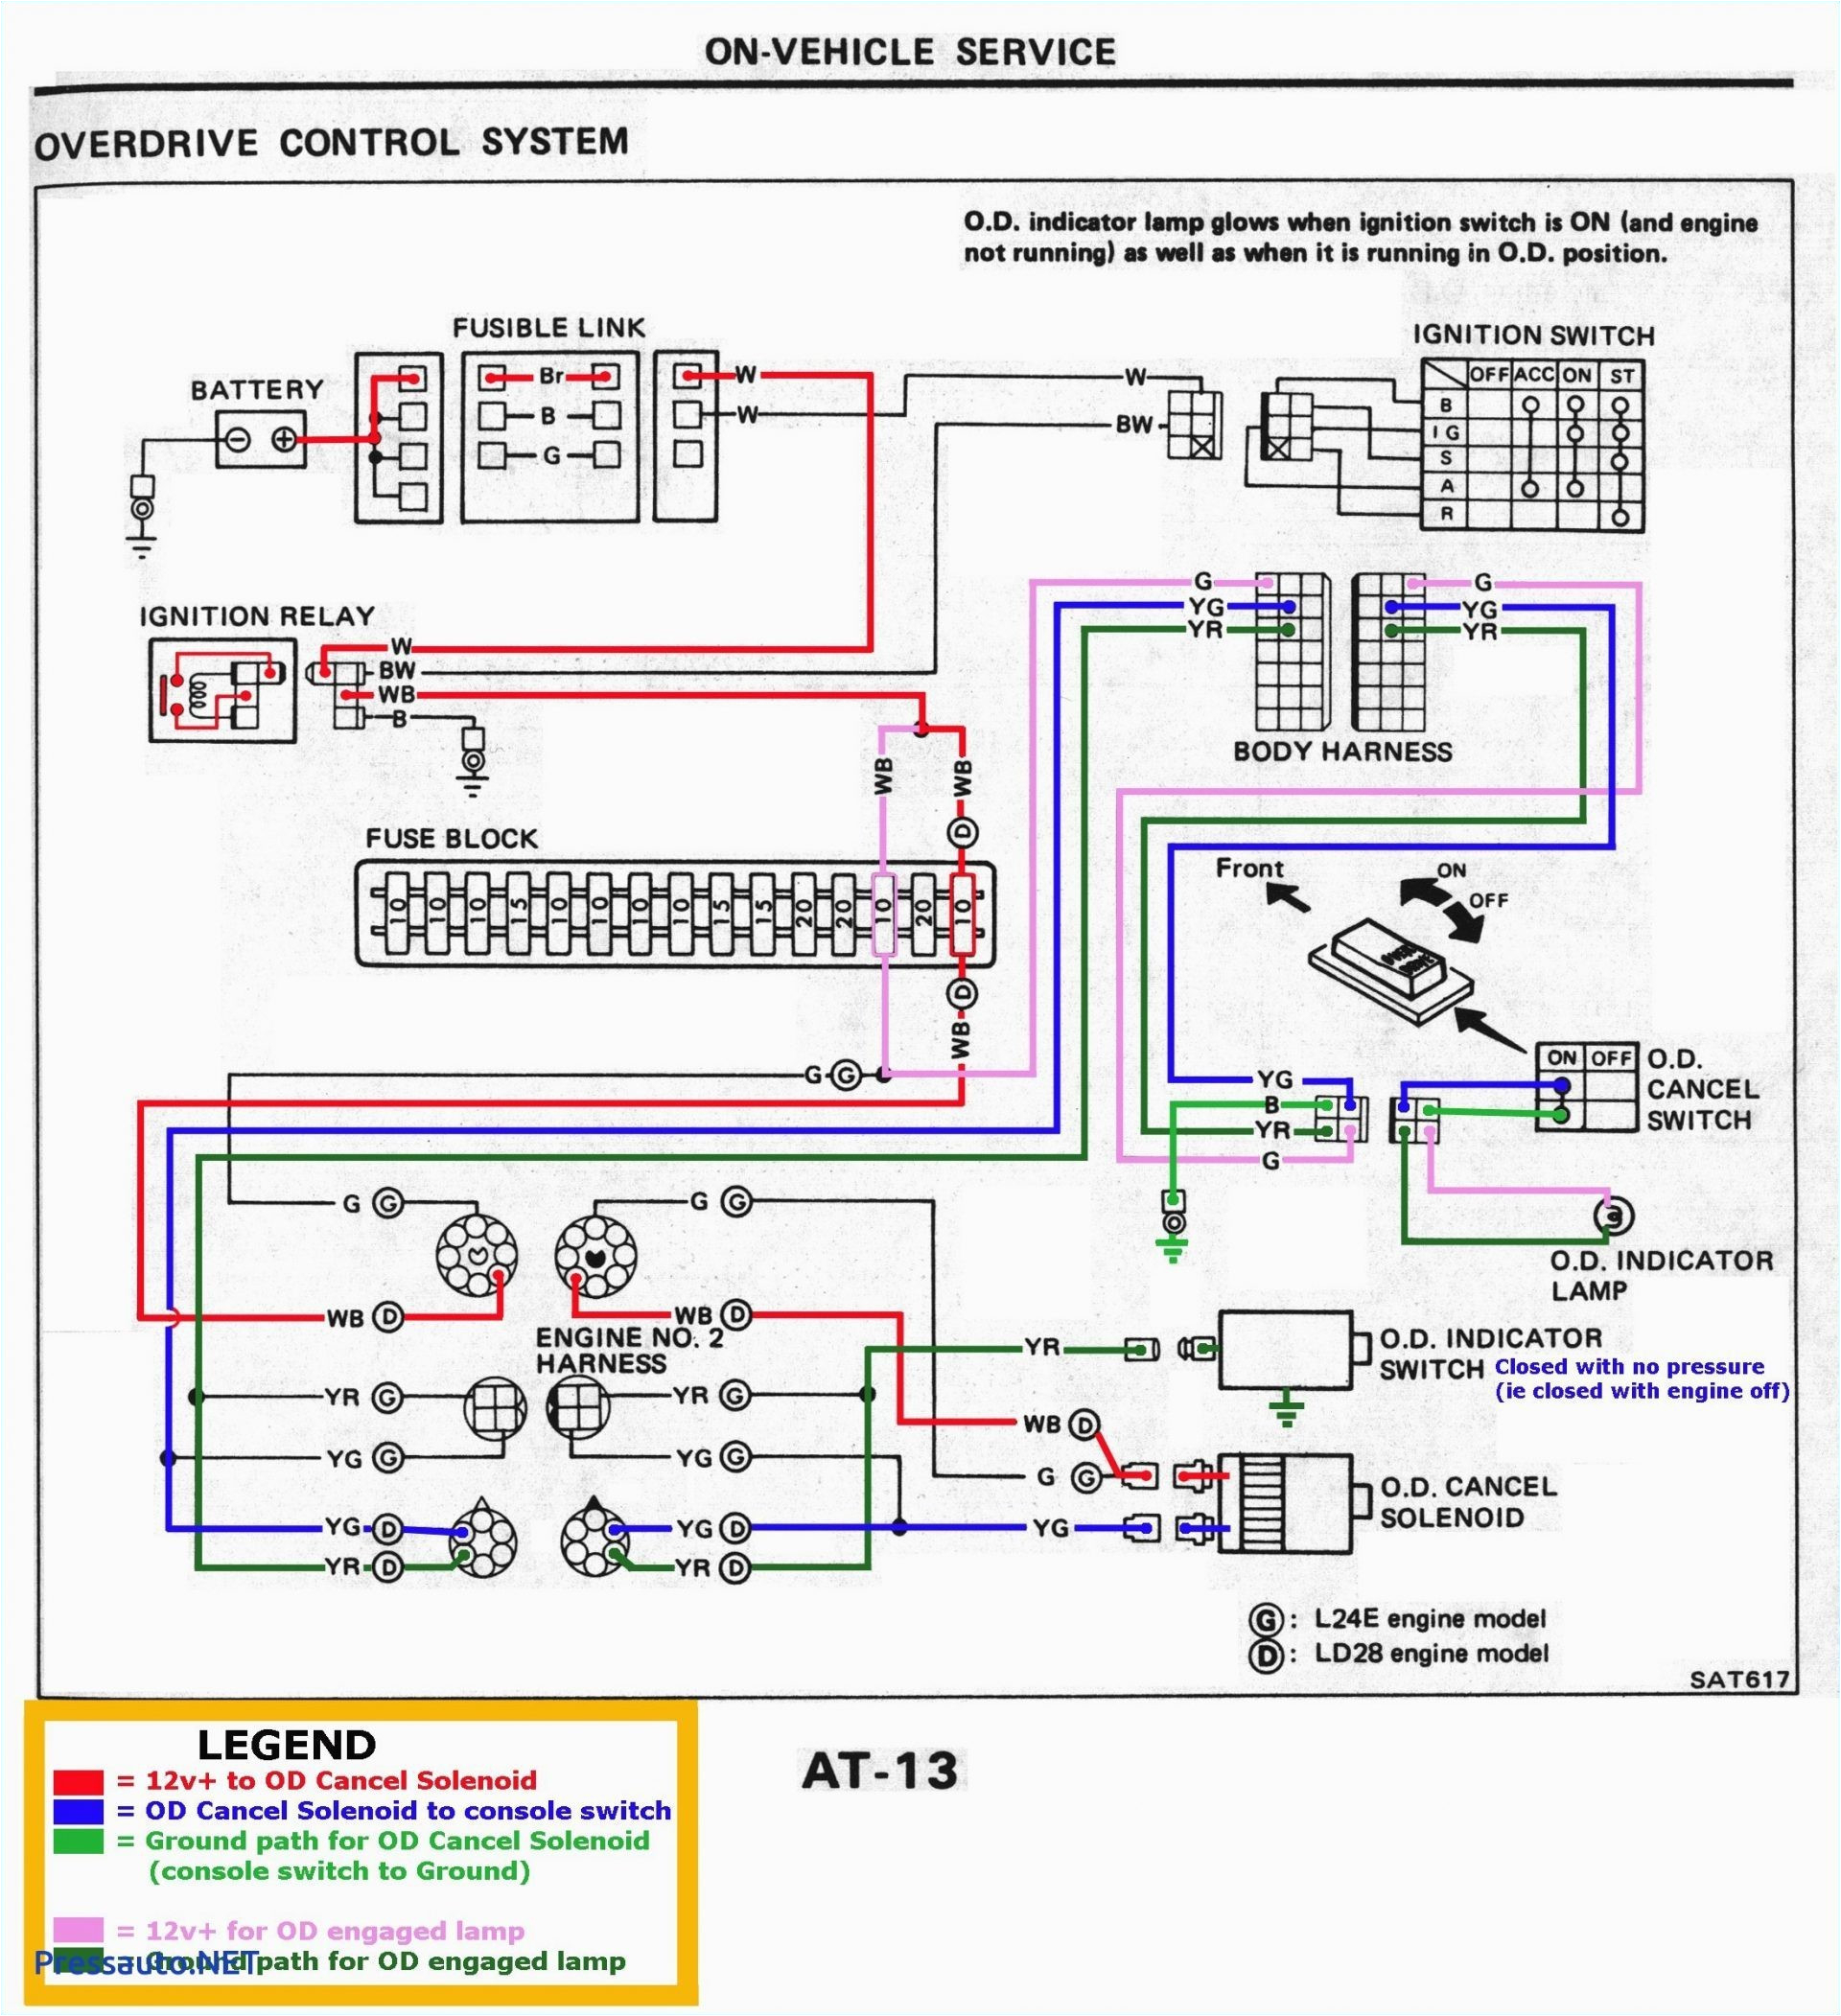 ford wiring color codes wiring diagram ford wiring harness color codes ford wiring color codes